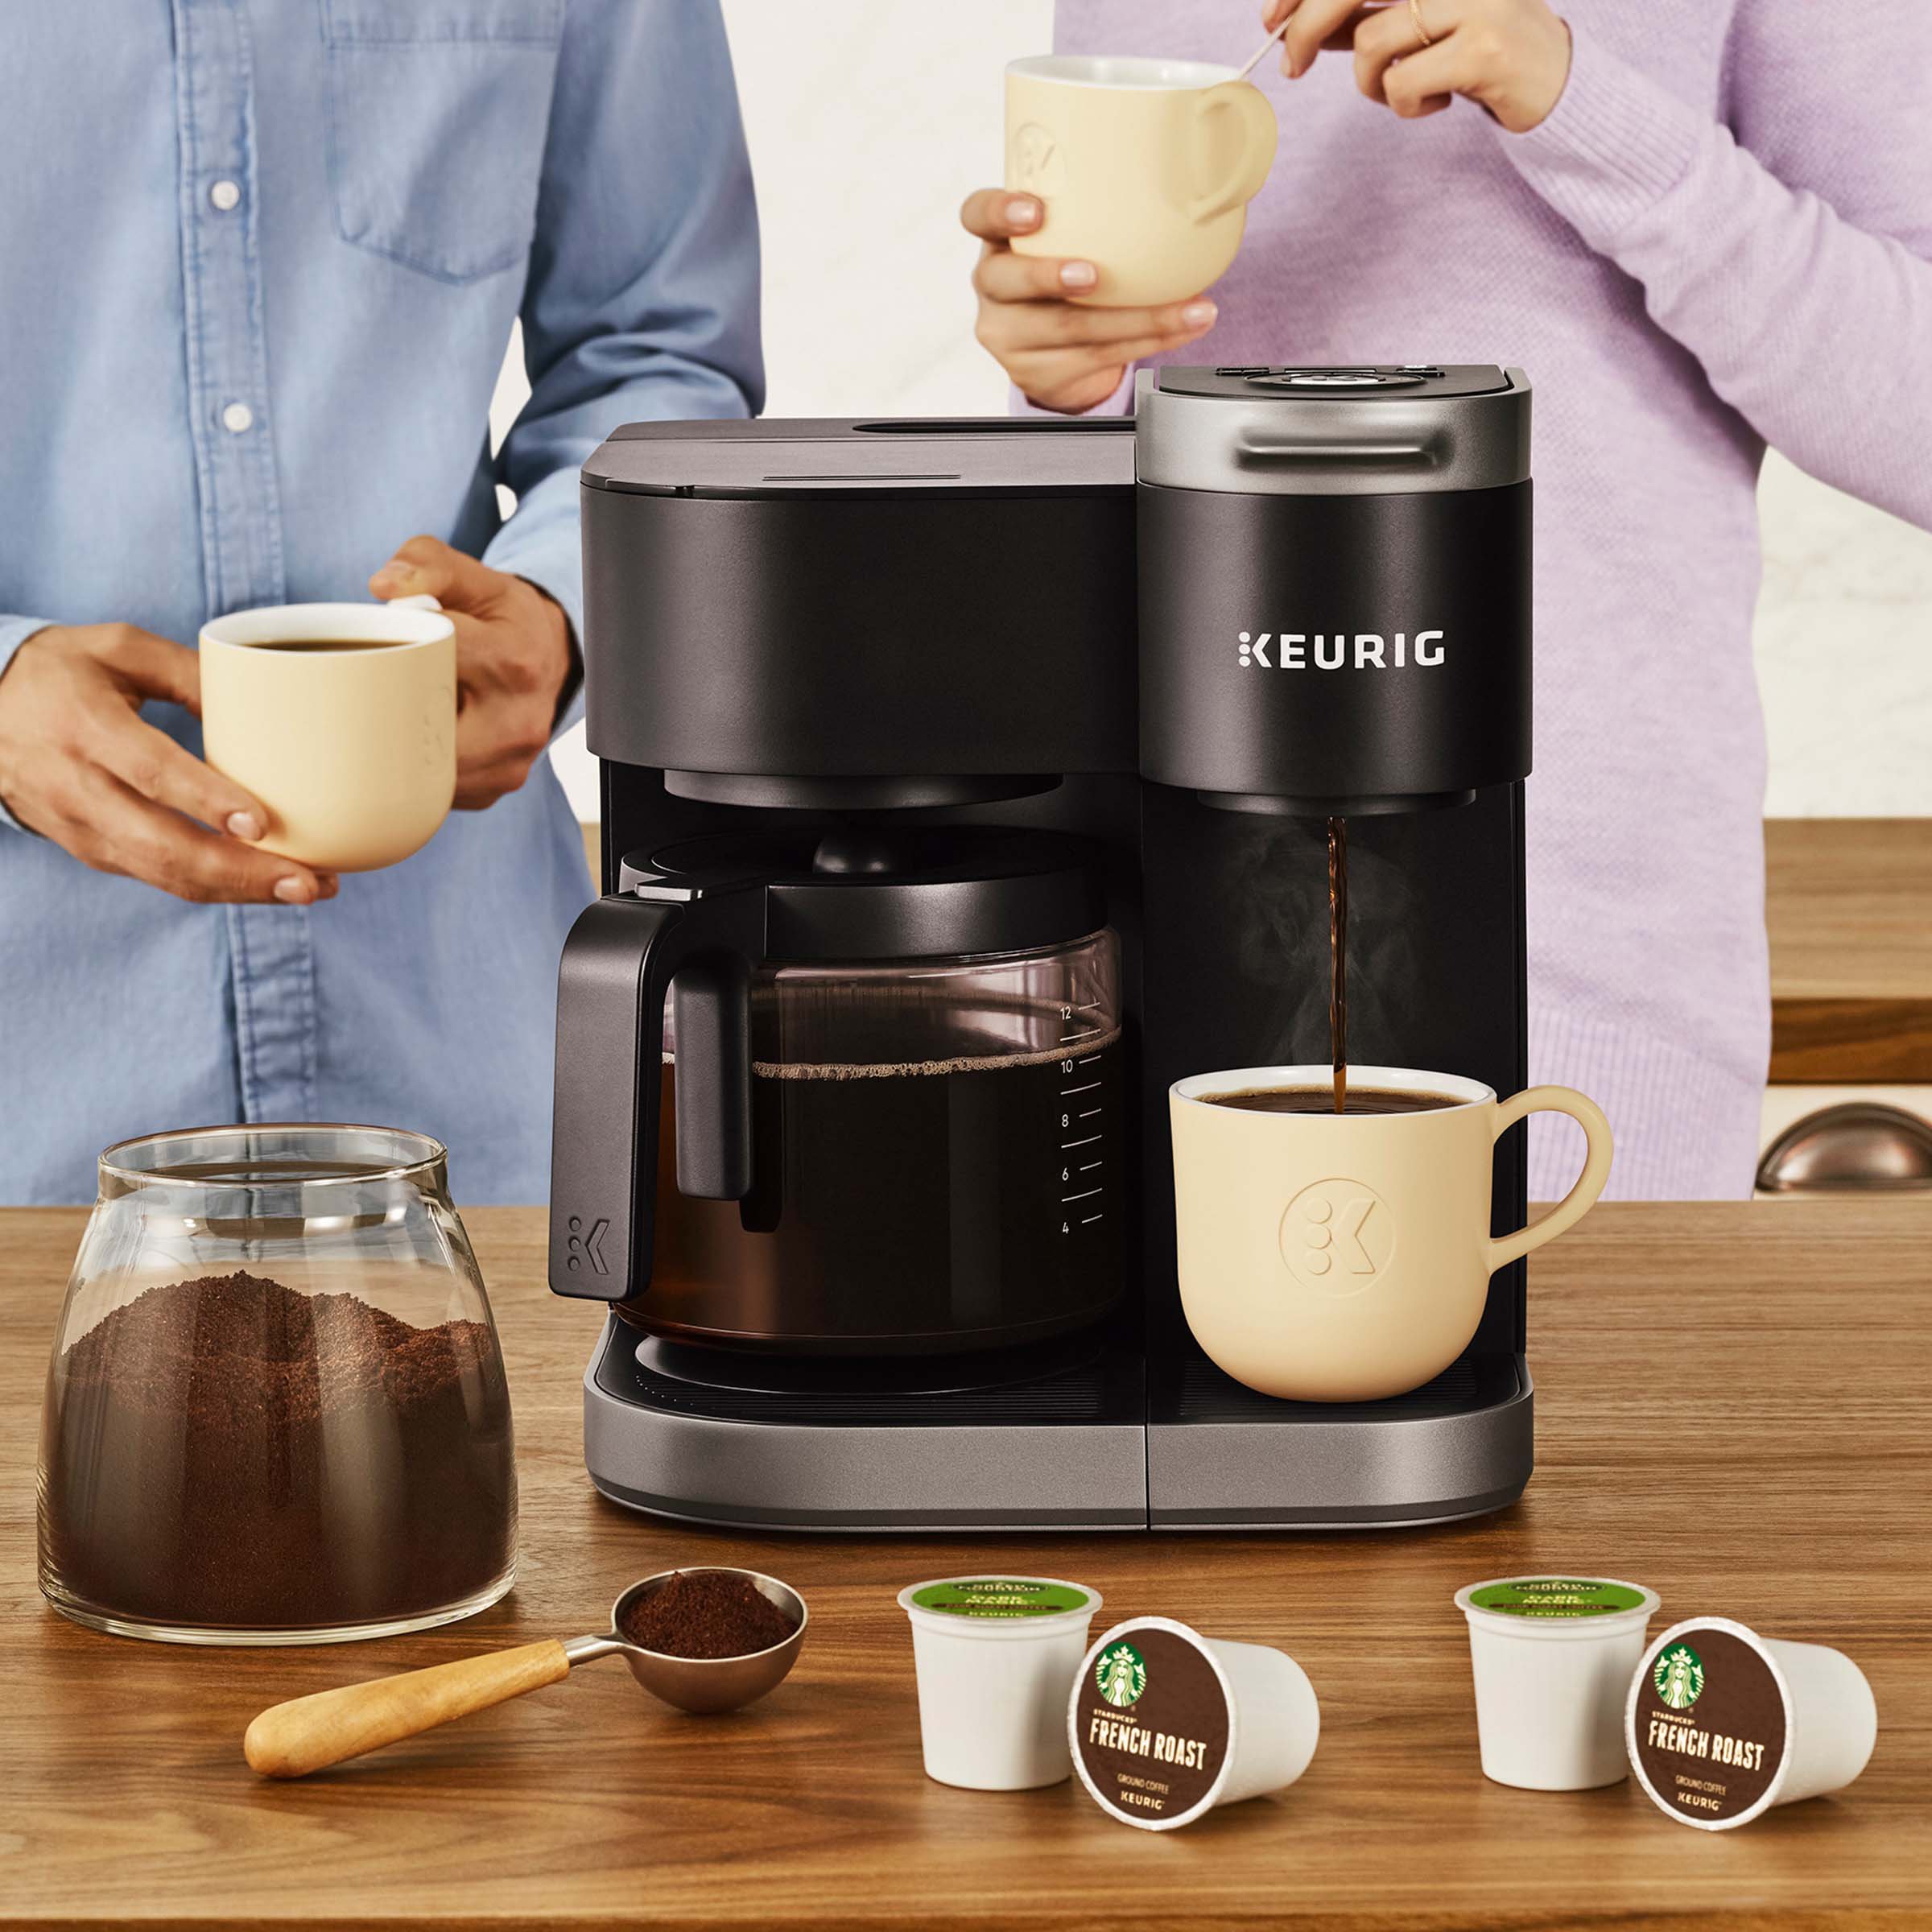 Keurig K-Duo Plus delivers single-serve and carafe brewing with